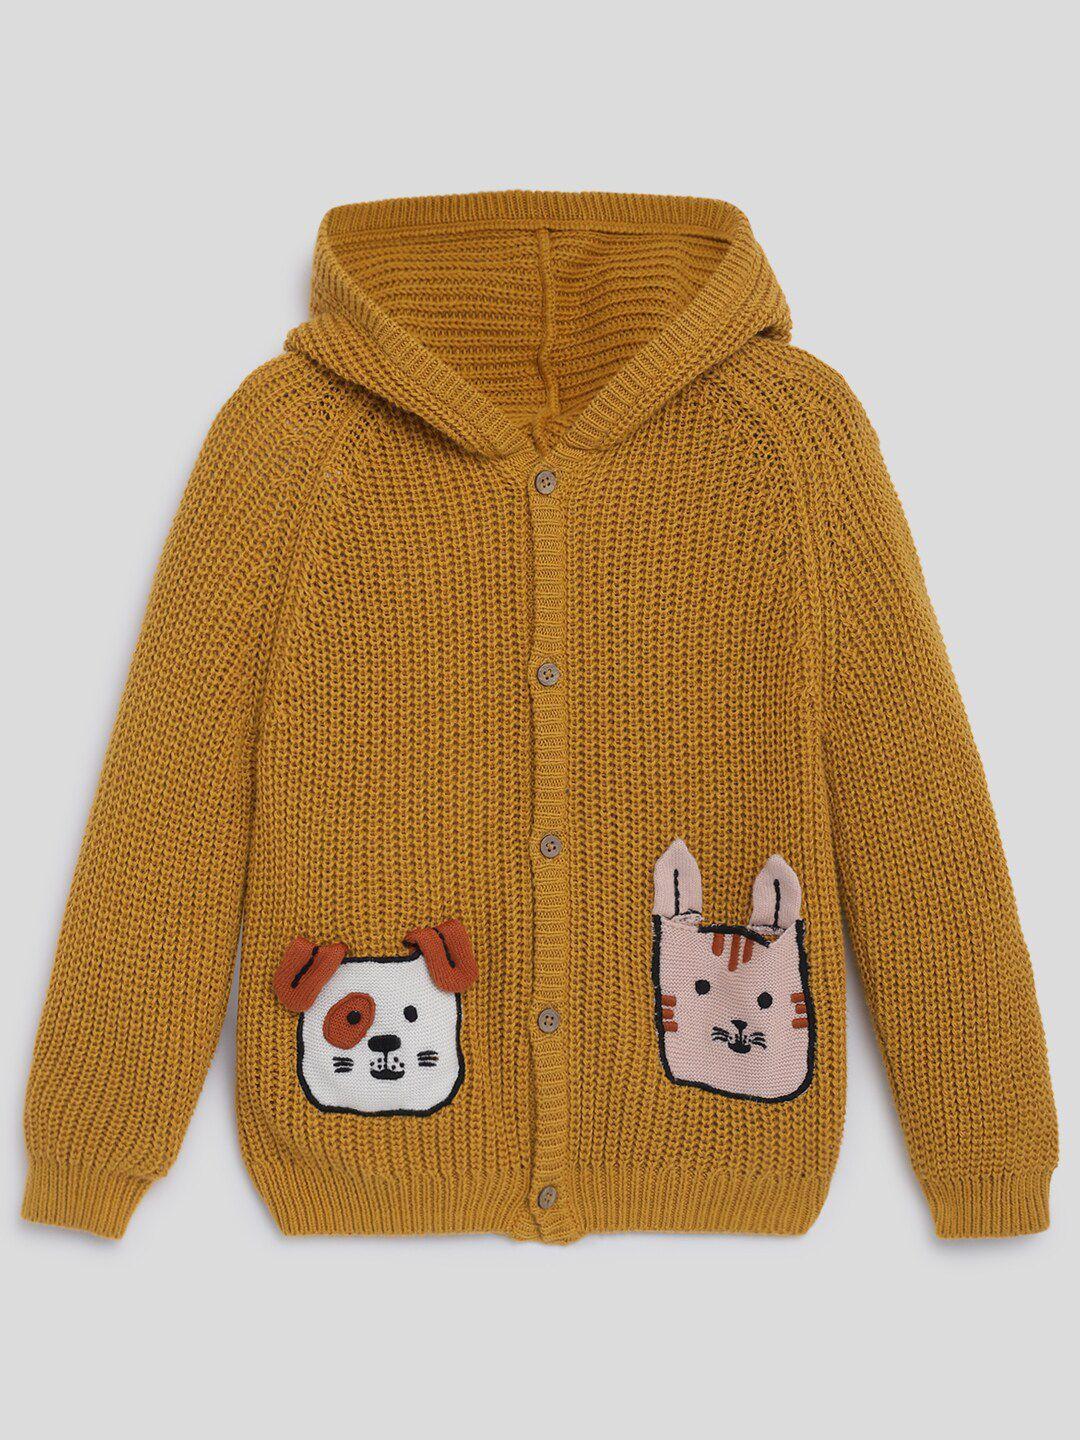 somersault-infants-embroidered-hooded-cotton-cardigan-sweater